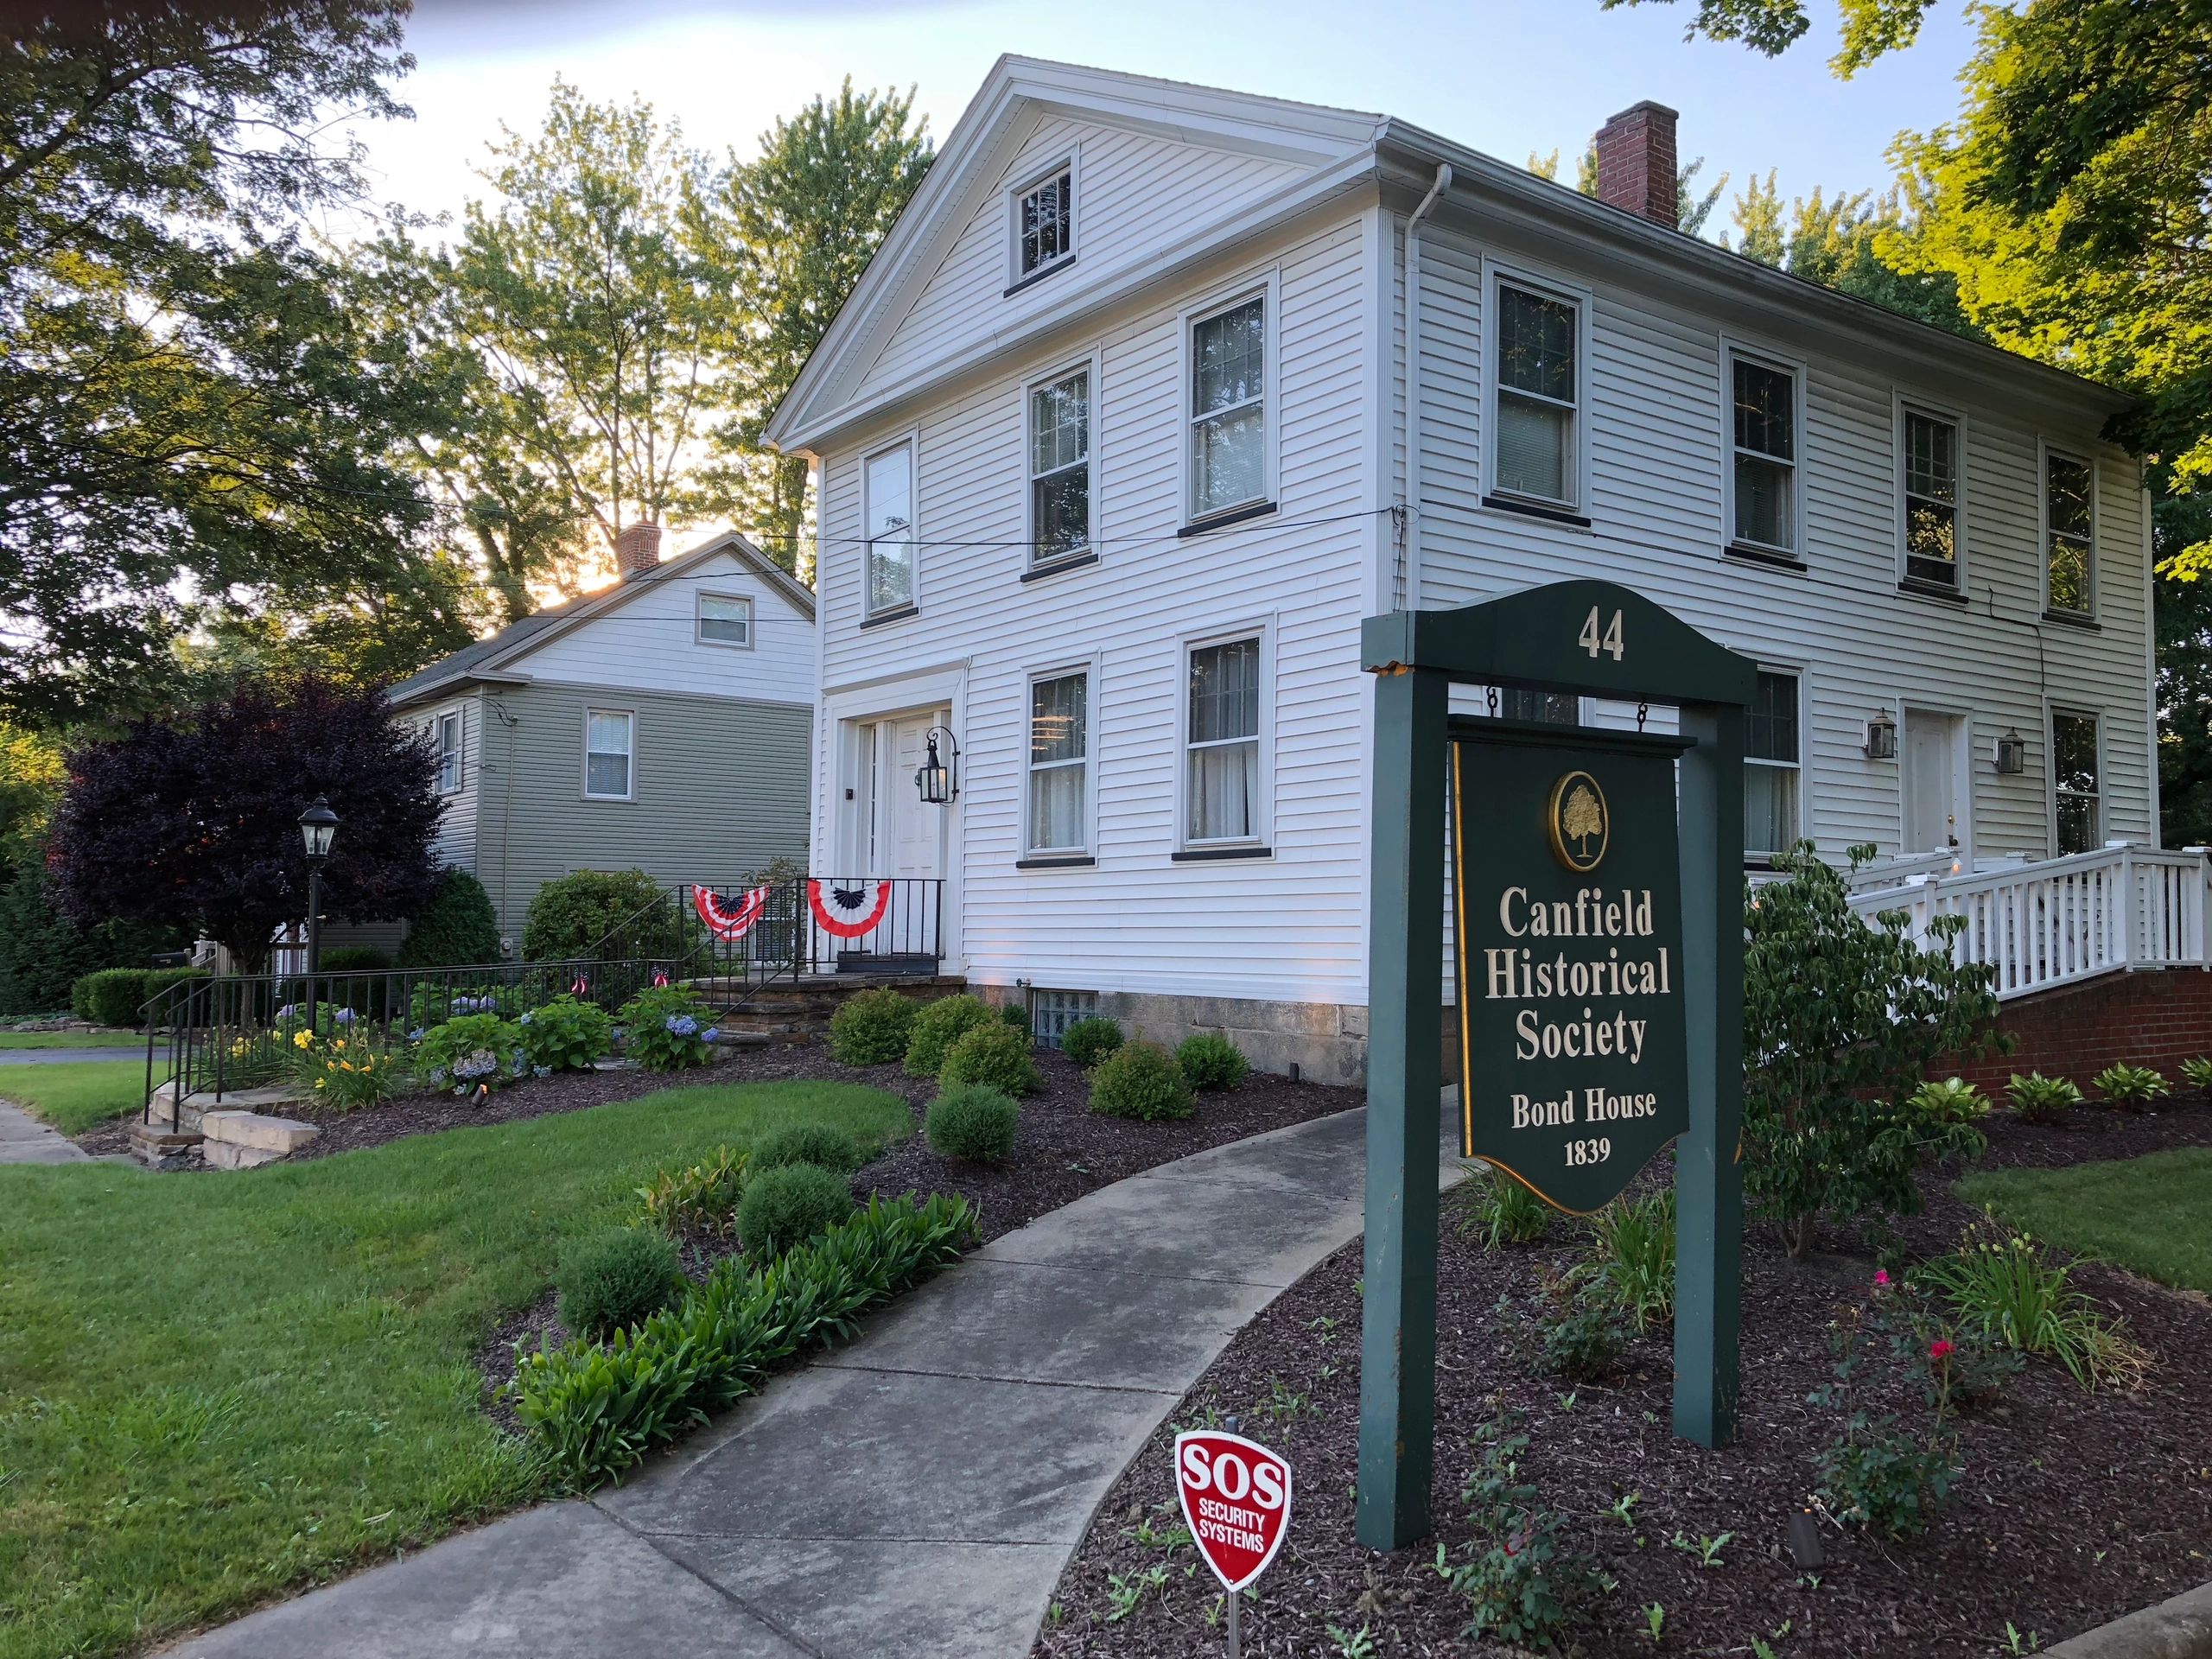 CANFIELD HISTORICAL SOCIETY